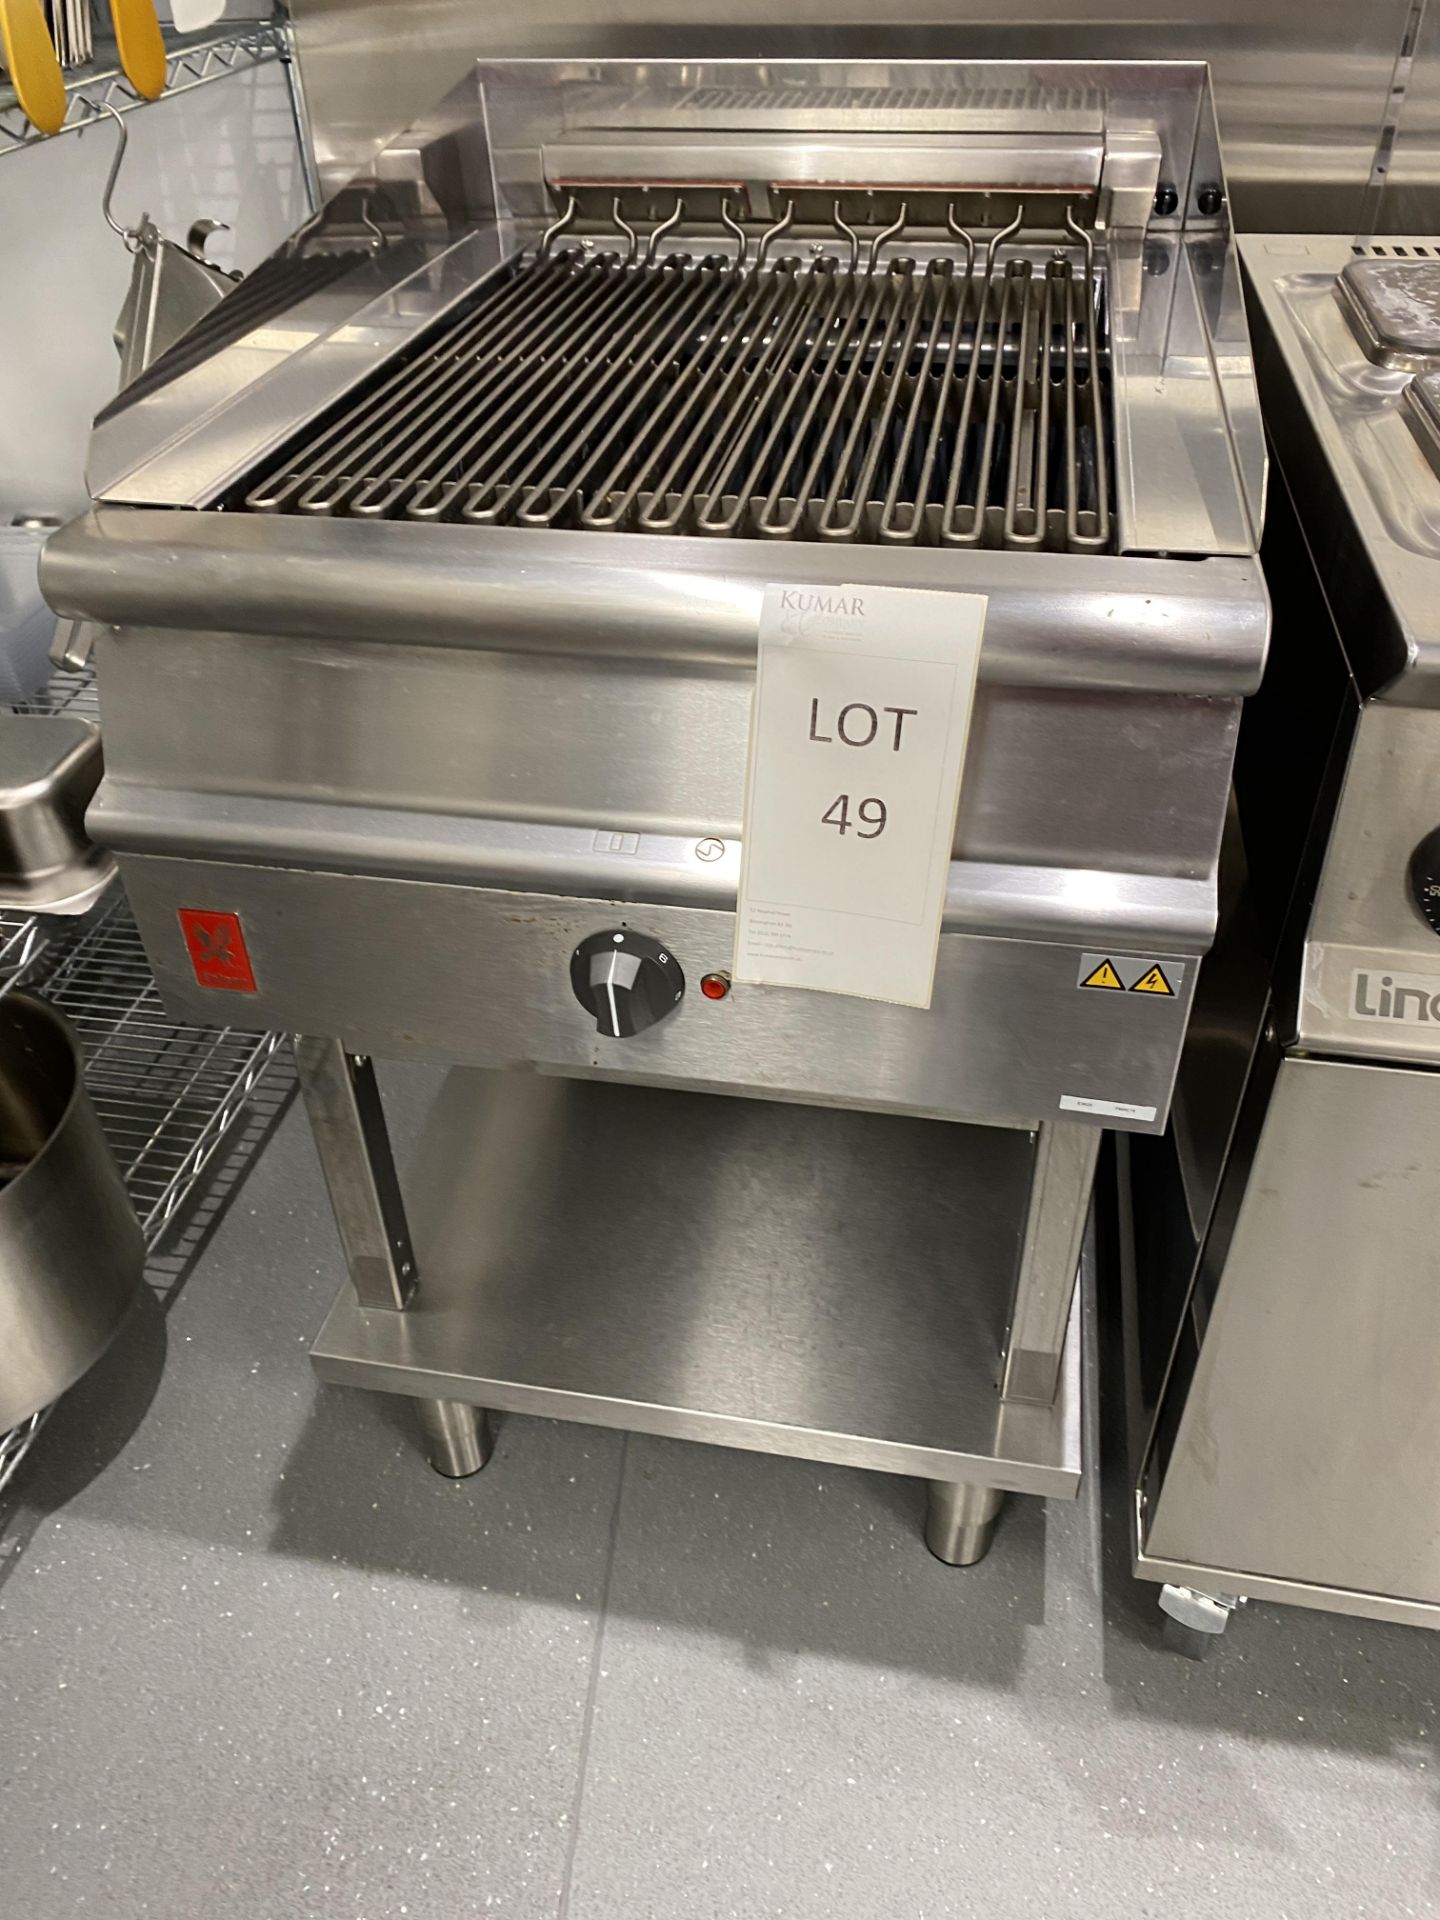 Falcon Dominator Plus, E3625 Electric Char Grill on Fixed Stand, Serial No.F605878 - Dimensions - Image 2 of 11